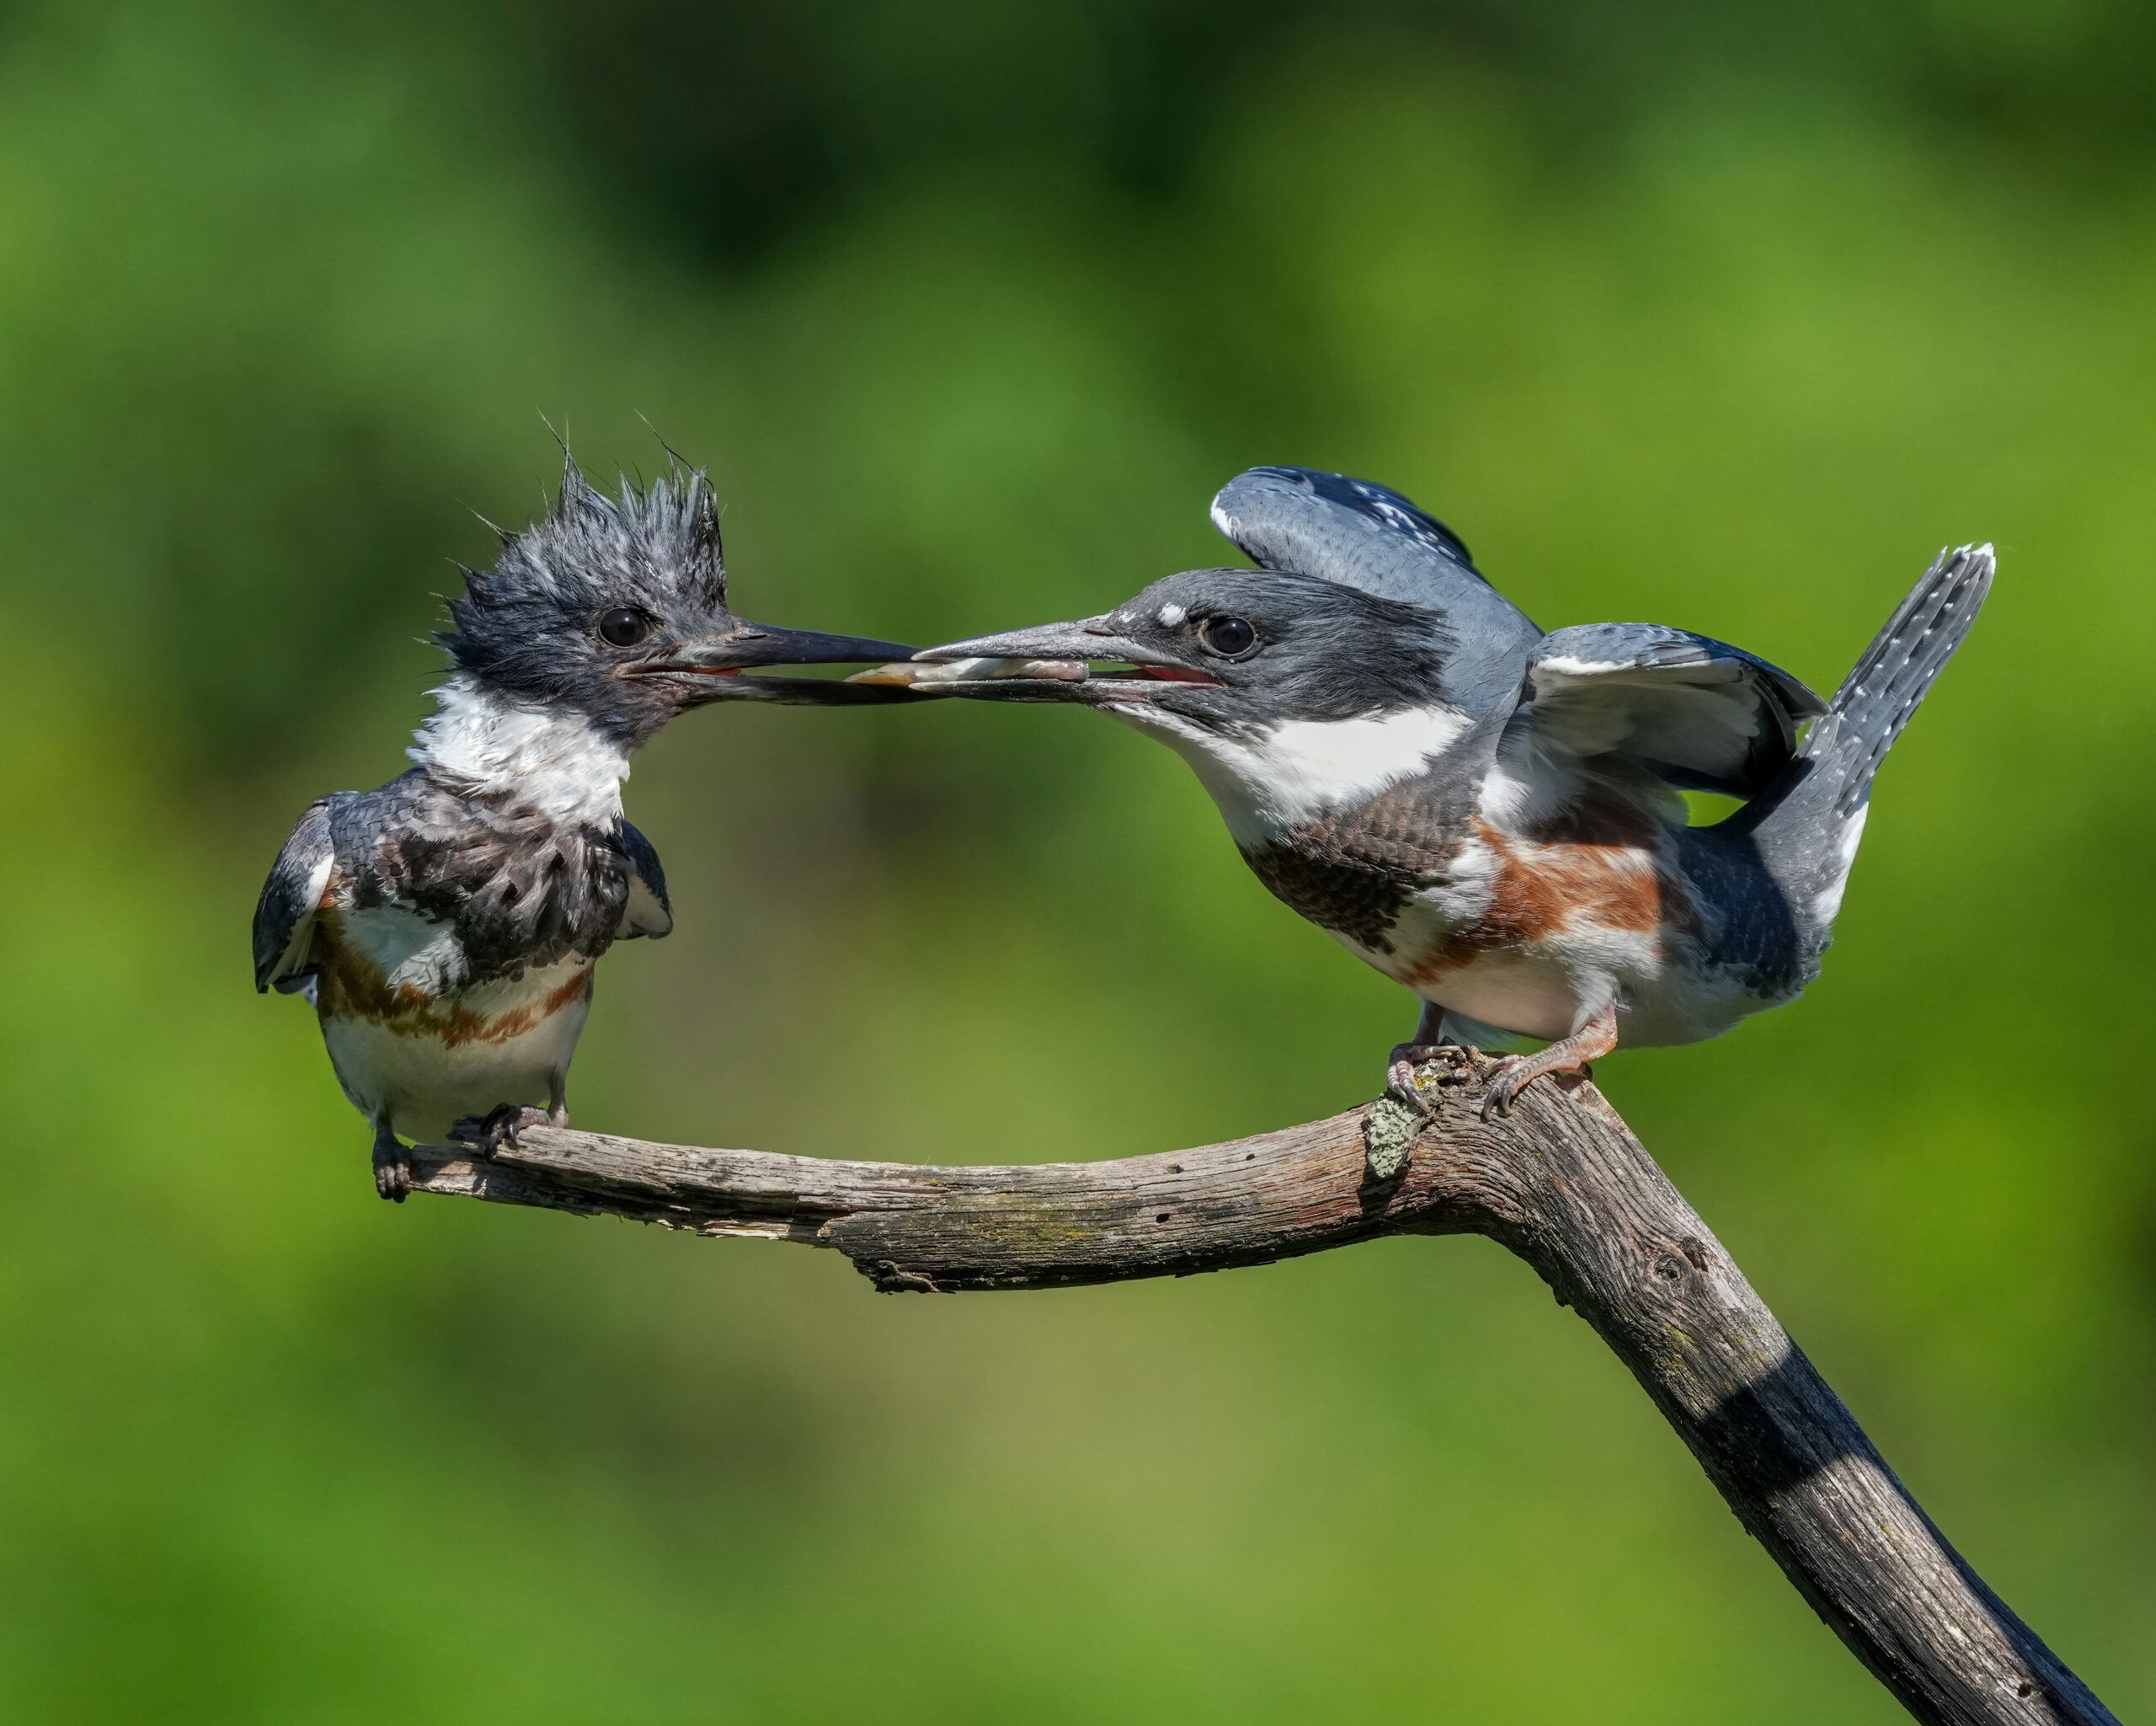 Photo Contest runner-up, a Belted Kingfisher feeding its fledgling on a branch